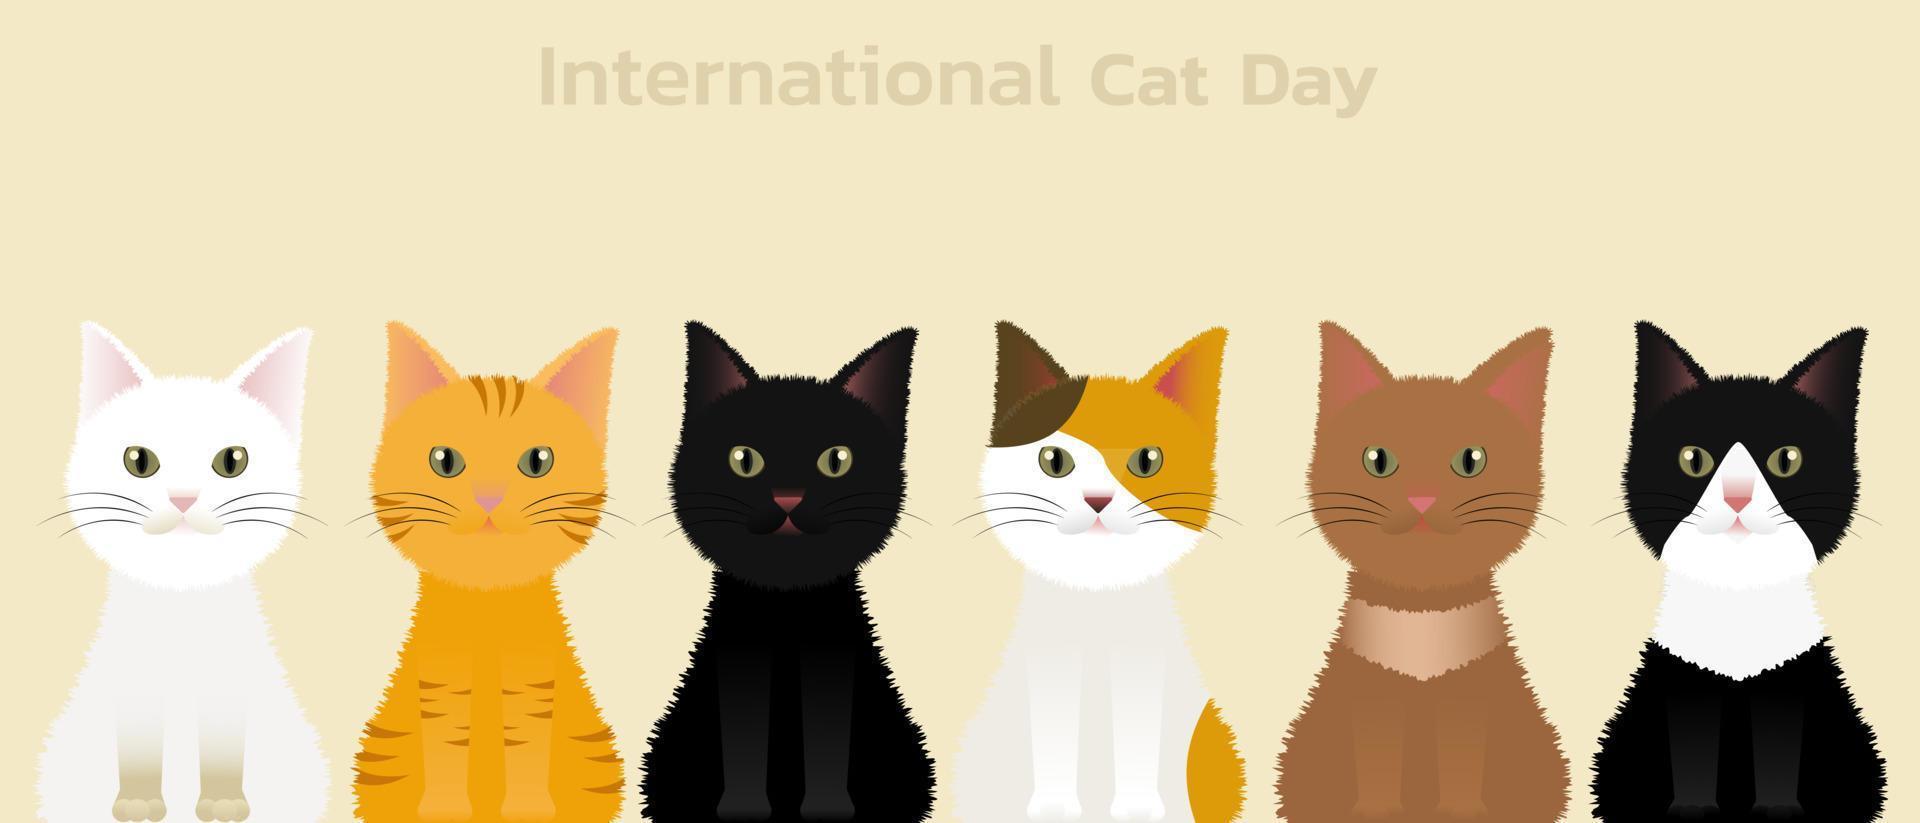 World Cat Day concept.International Cat Day. Holiday concept. Template for background, Web banner, card, poster vector